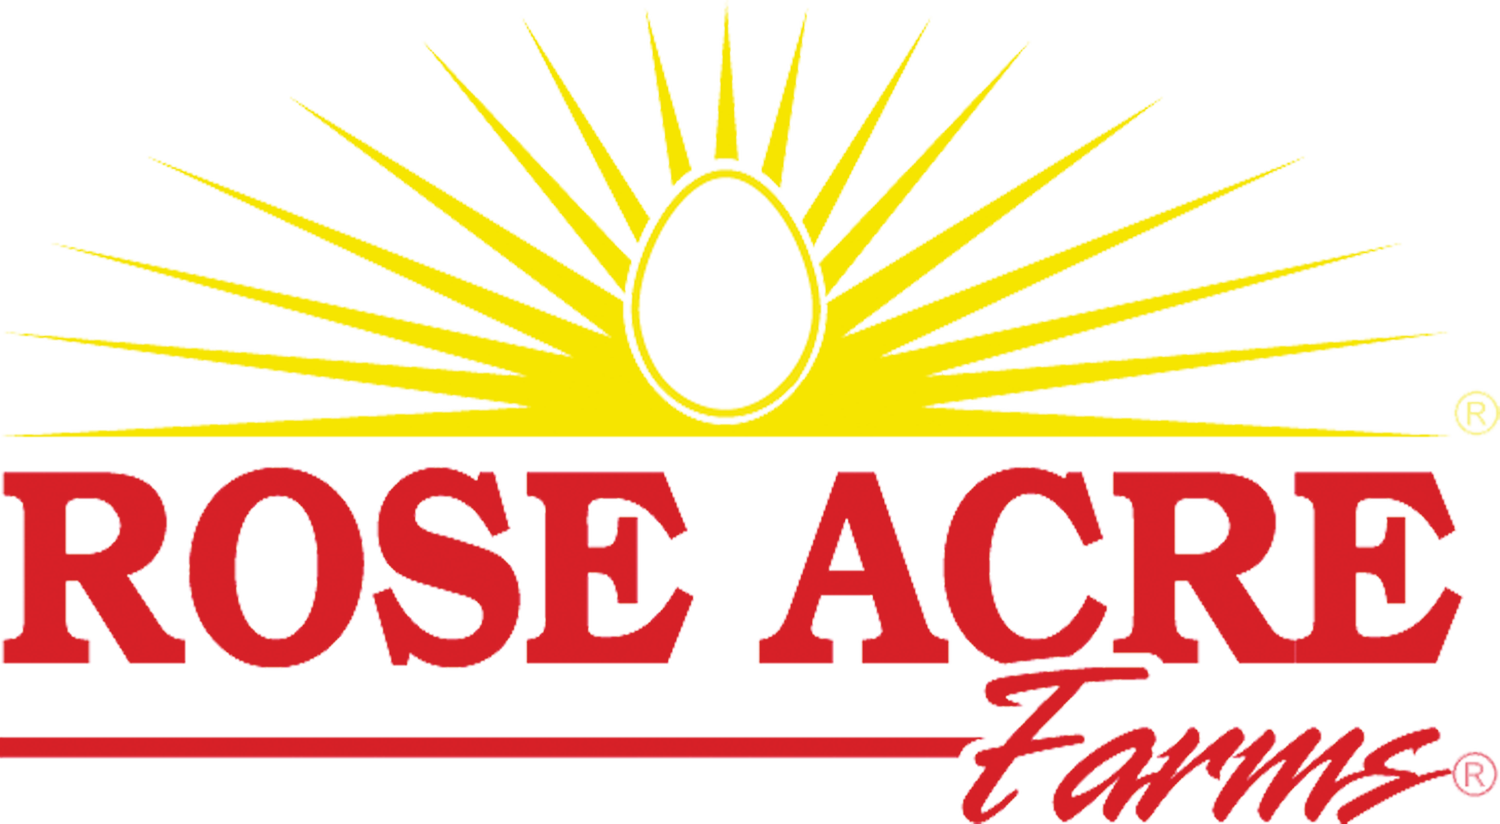 Rose Acre Farms - The Good Egg People